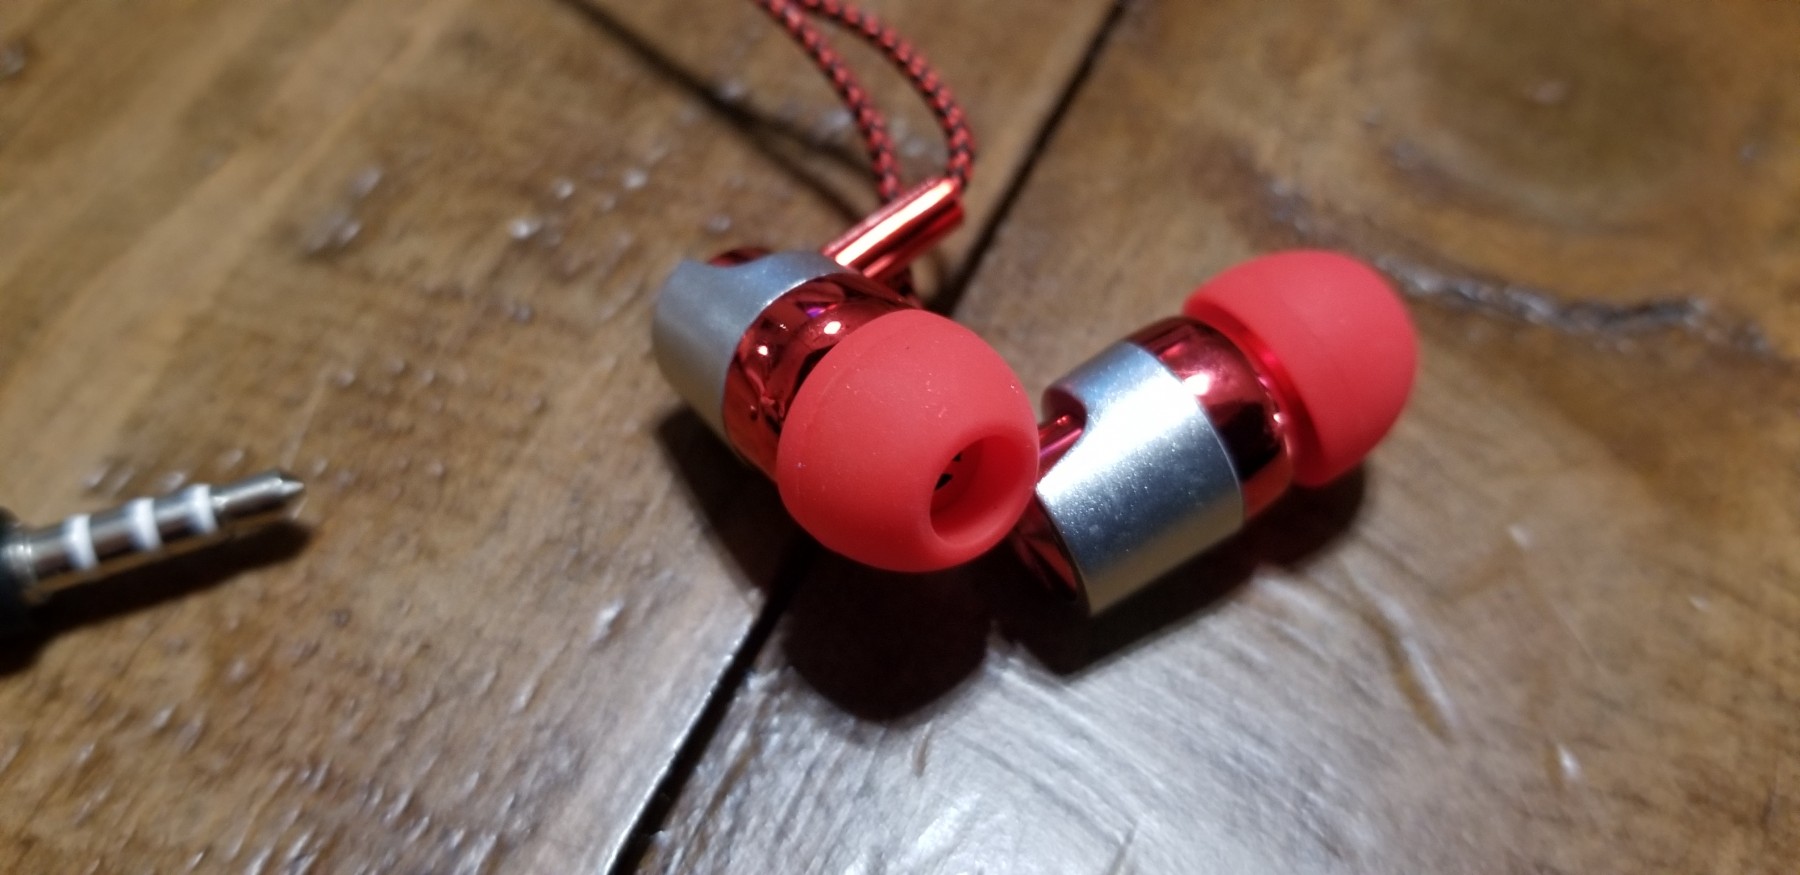 Love the color of these earbuds